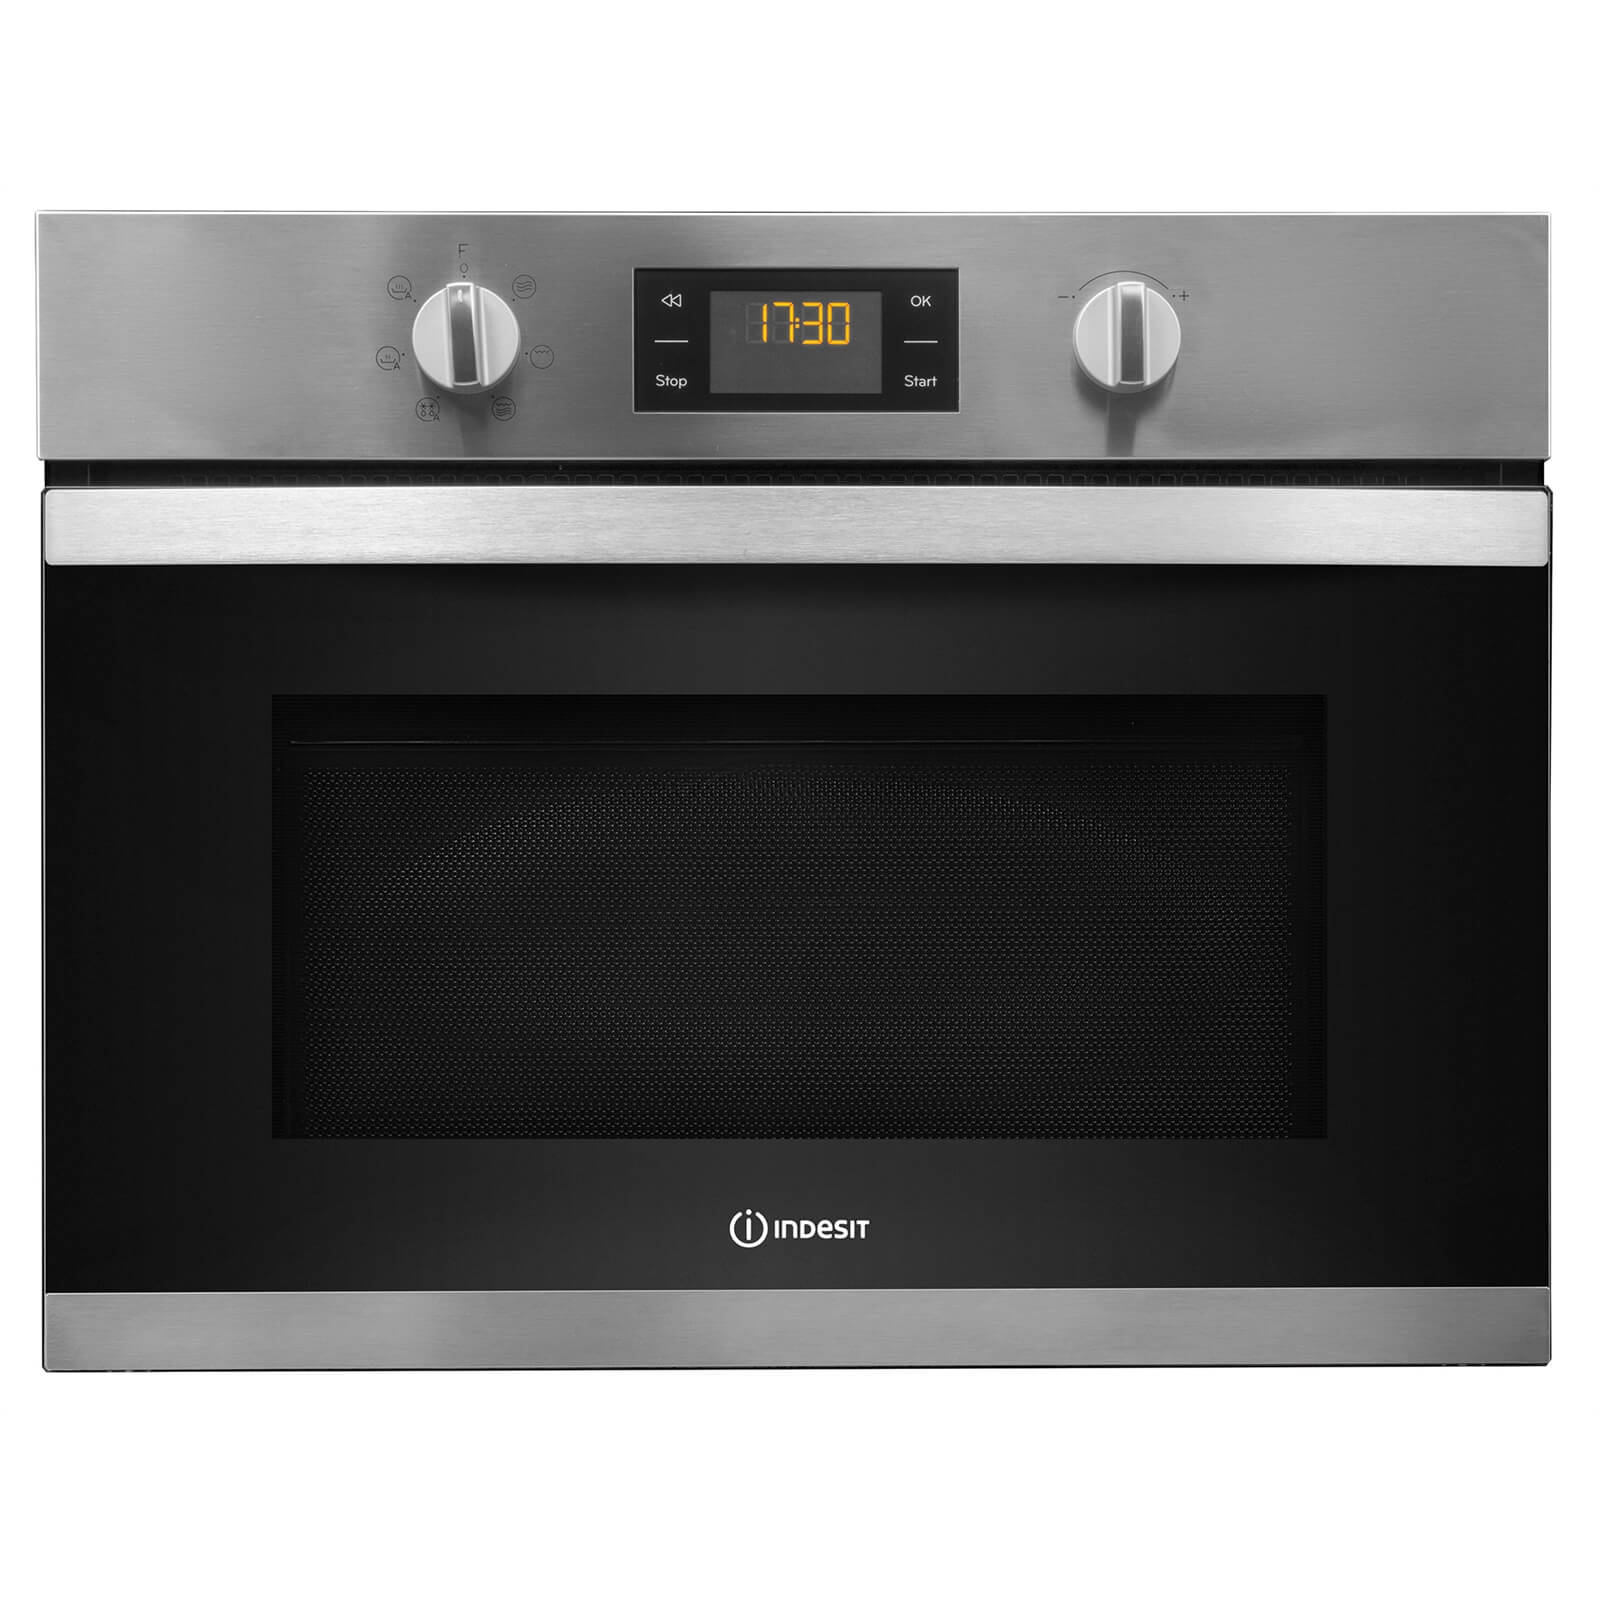 Indesit MWI 3443 IX UK Built-in Microwave - Stainless Steel